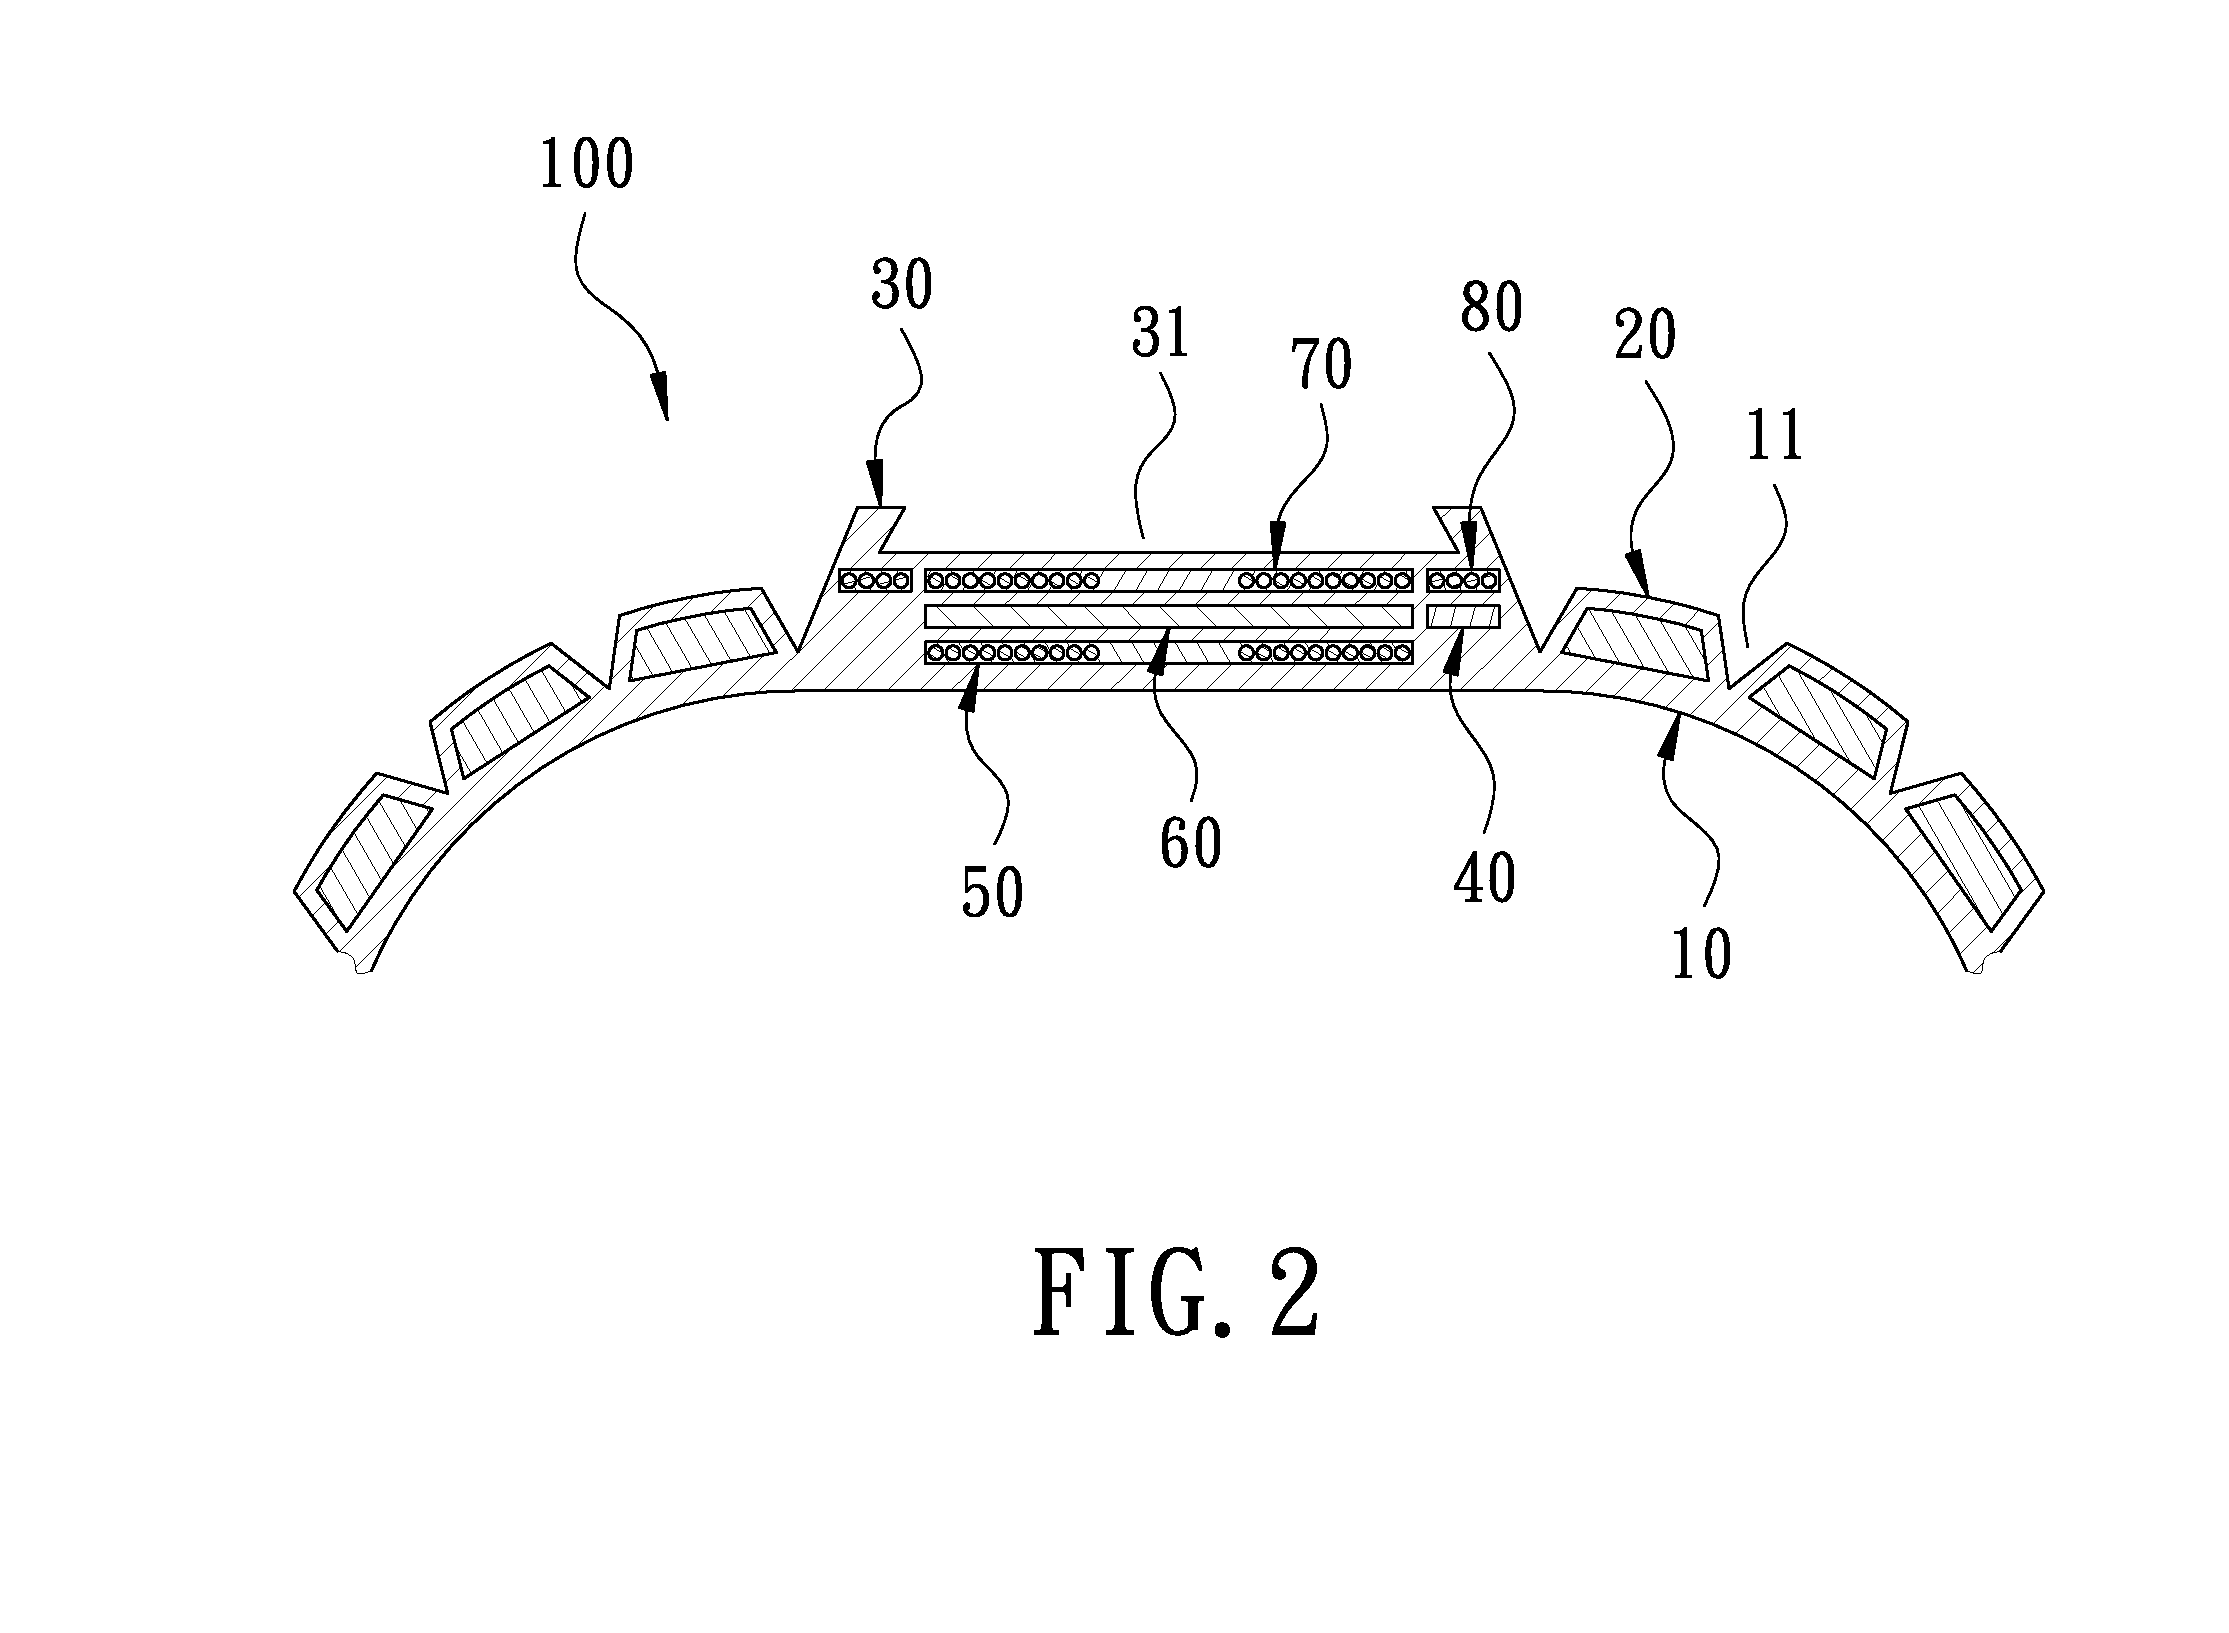 Wireless charge and discharge wrist band for placing cell phone